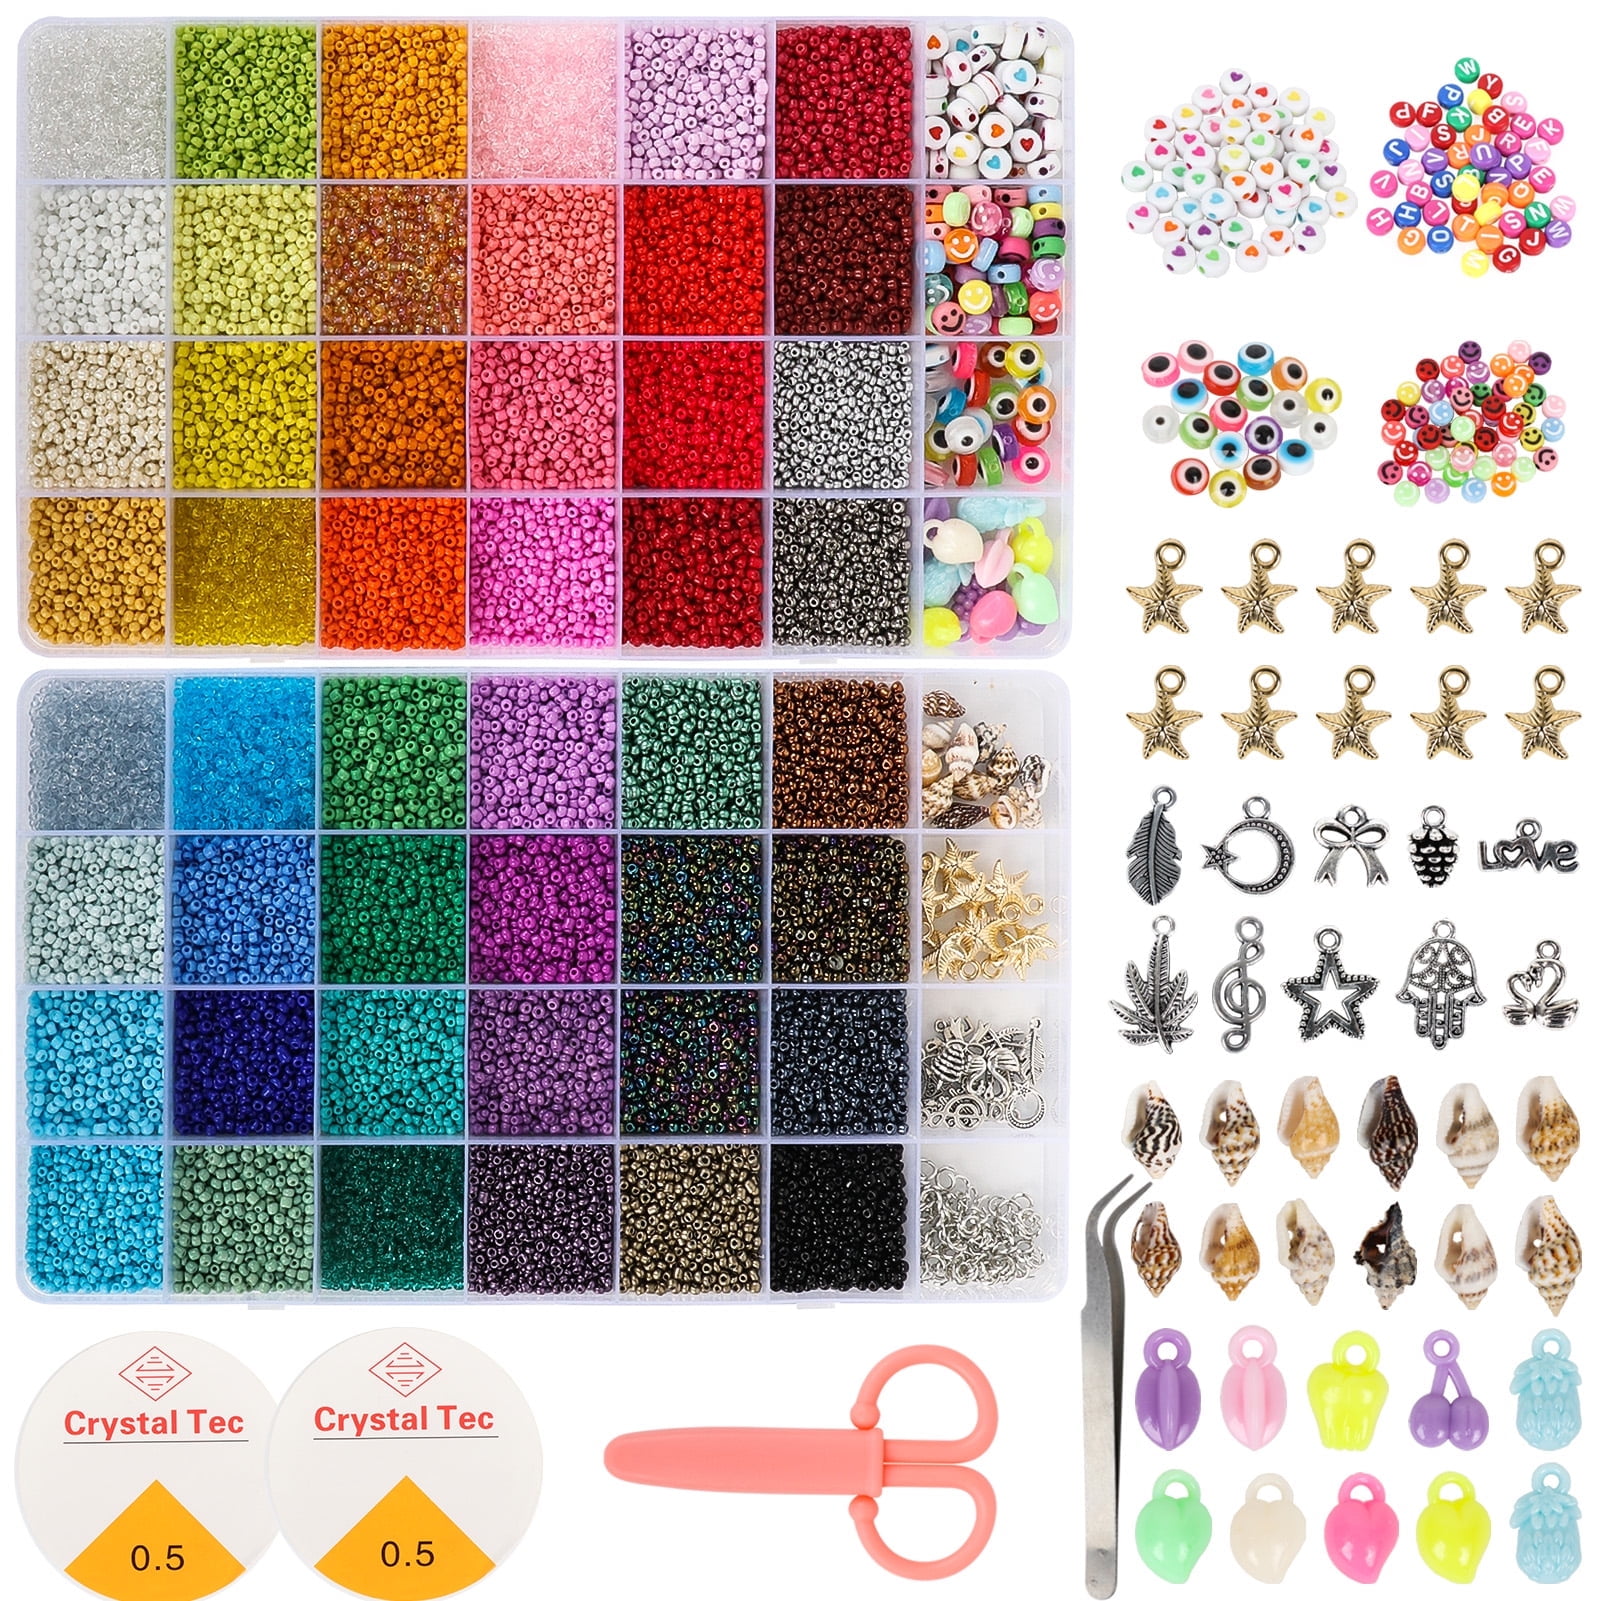 Koralakiri 40000+ 2mm Glass Seed Beads for Bracelet Jewelry Making Kit, 48  Colors Glass Beads Kit for Teen Girl Gifts, Small Seed Beads for Necklace  Ring Making Kit with Pendants 